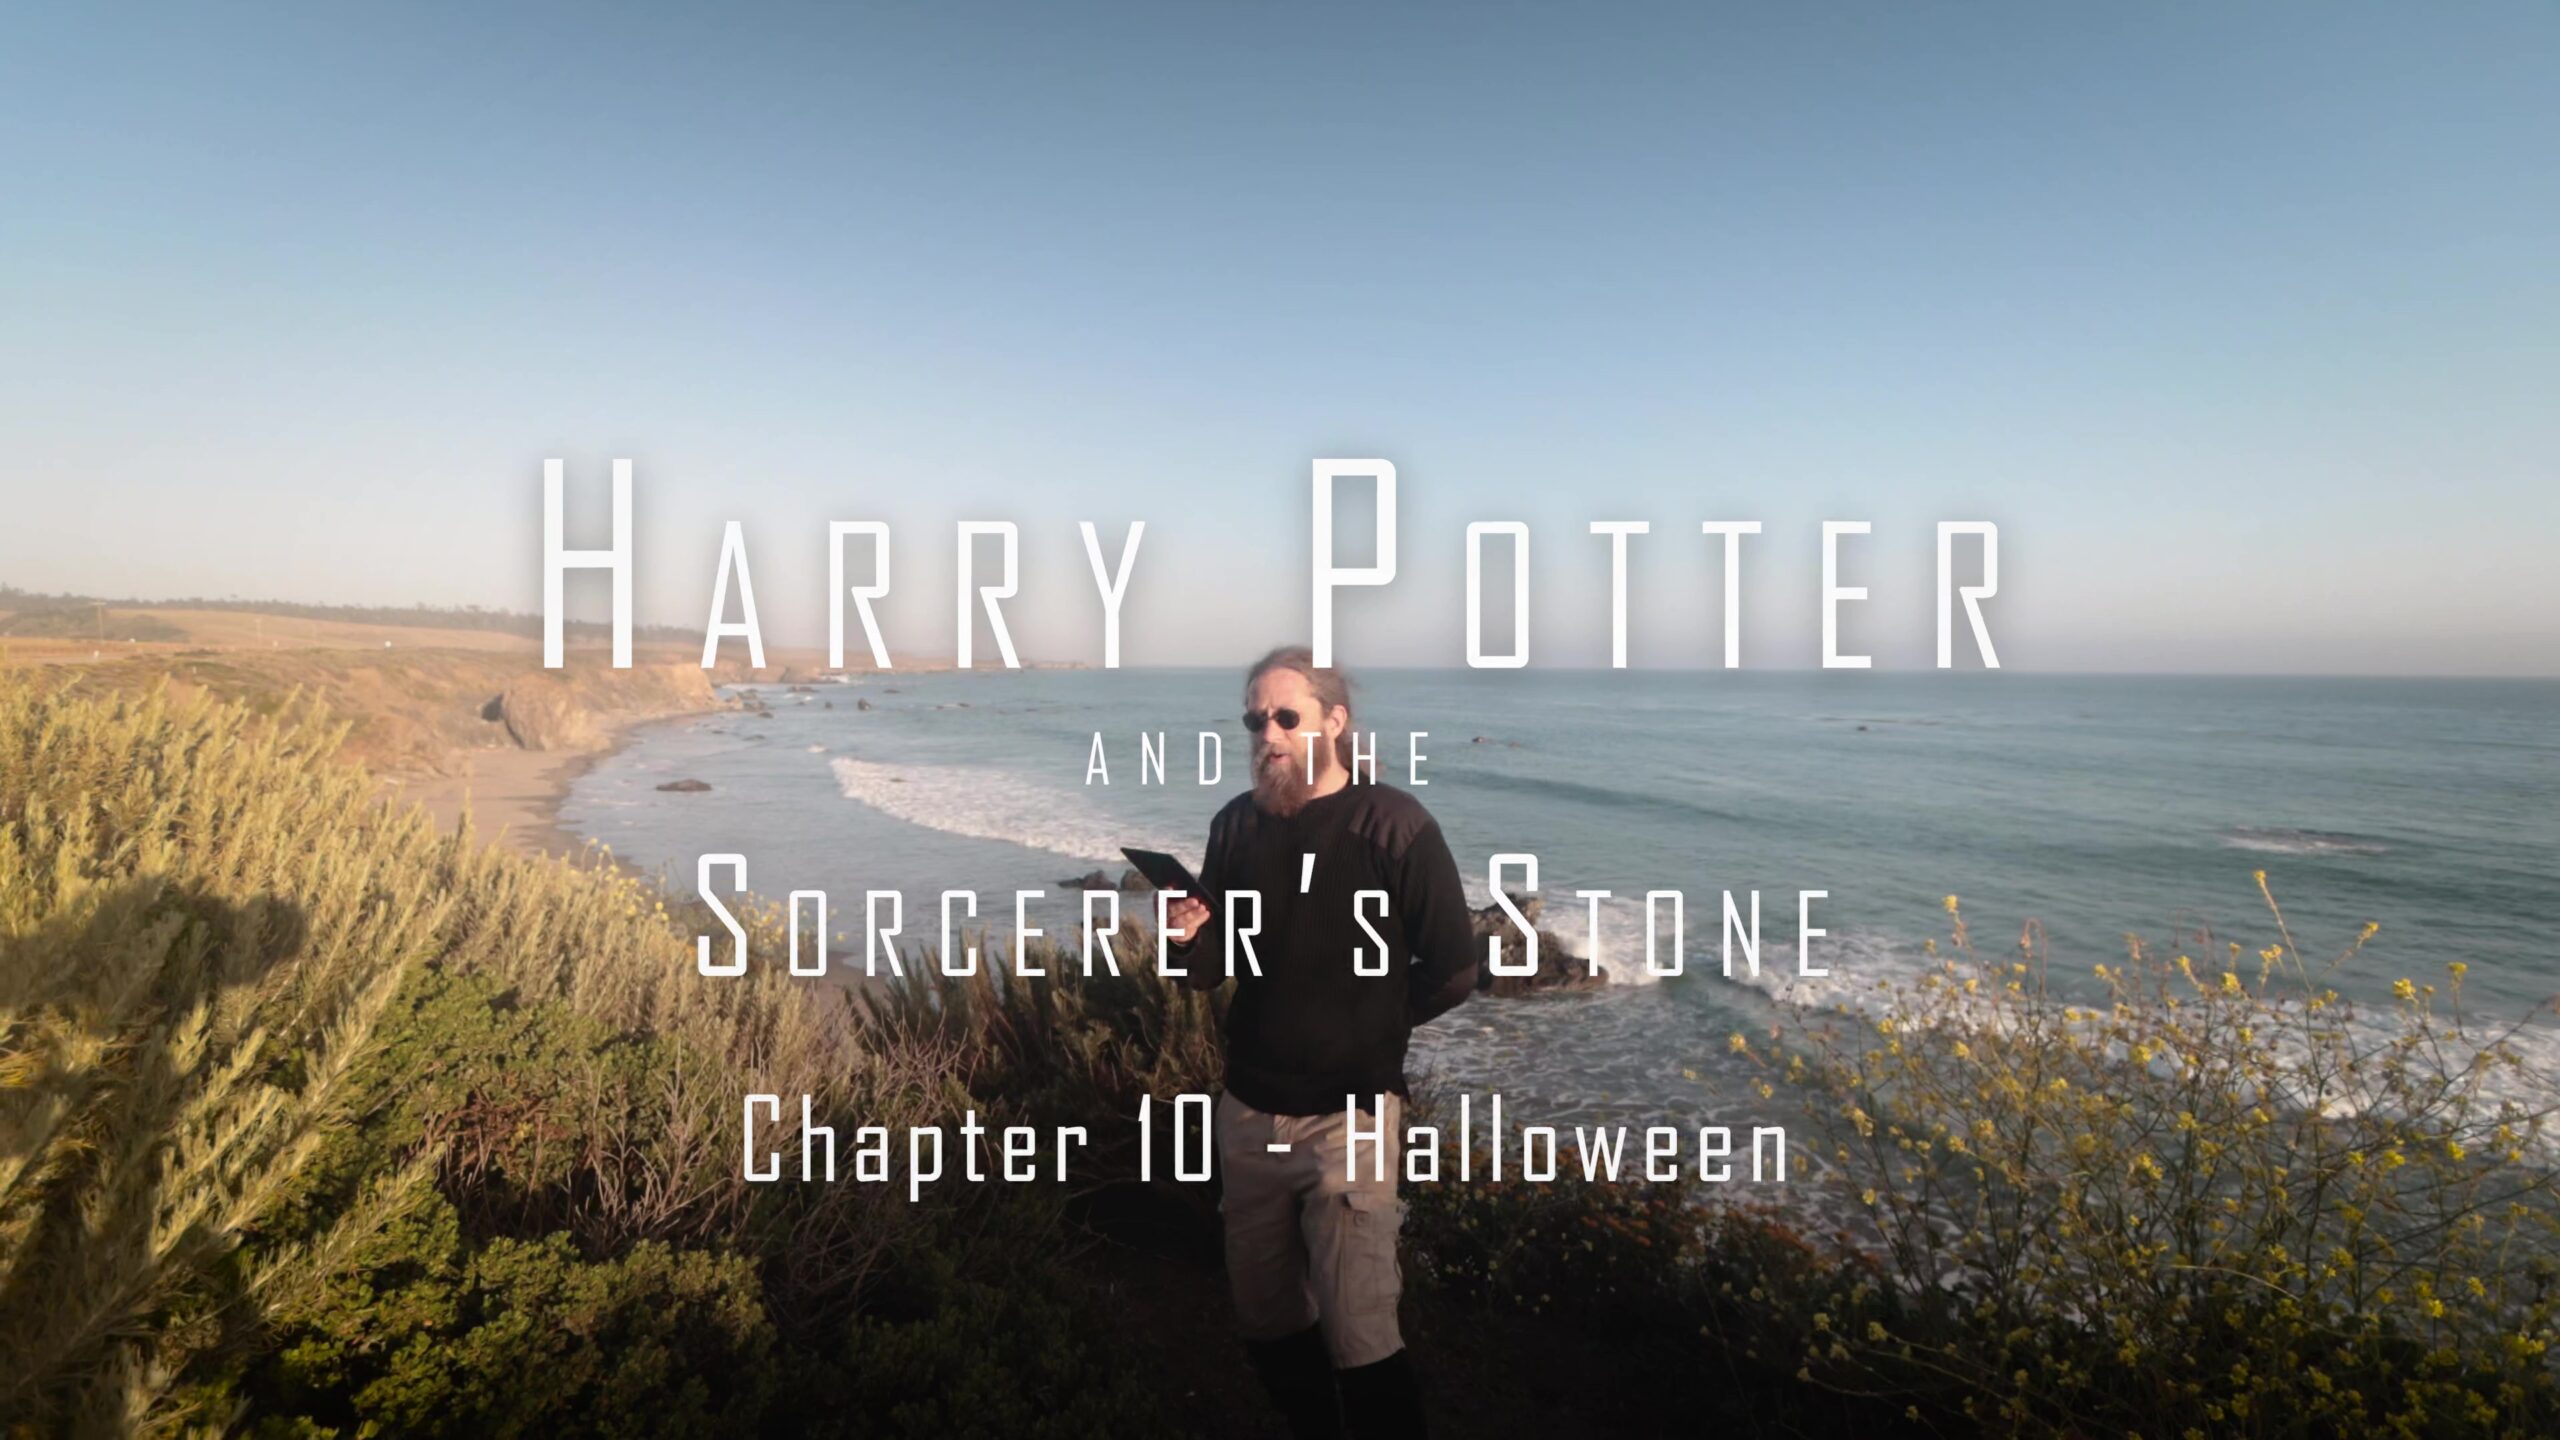 Harry Potter and The Sorcerer’s Stone – Chapter 10 – Halloween